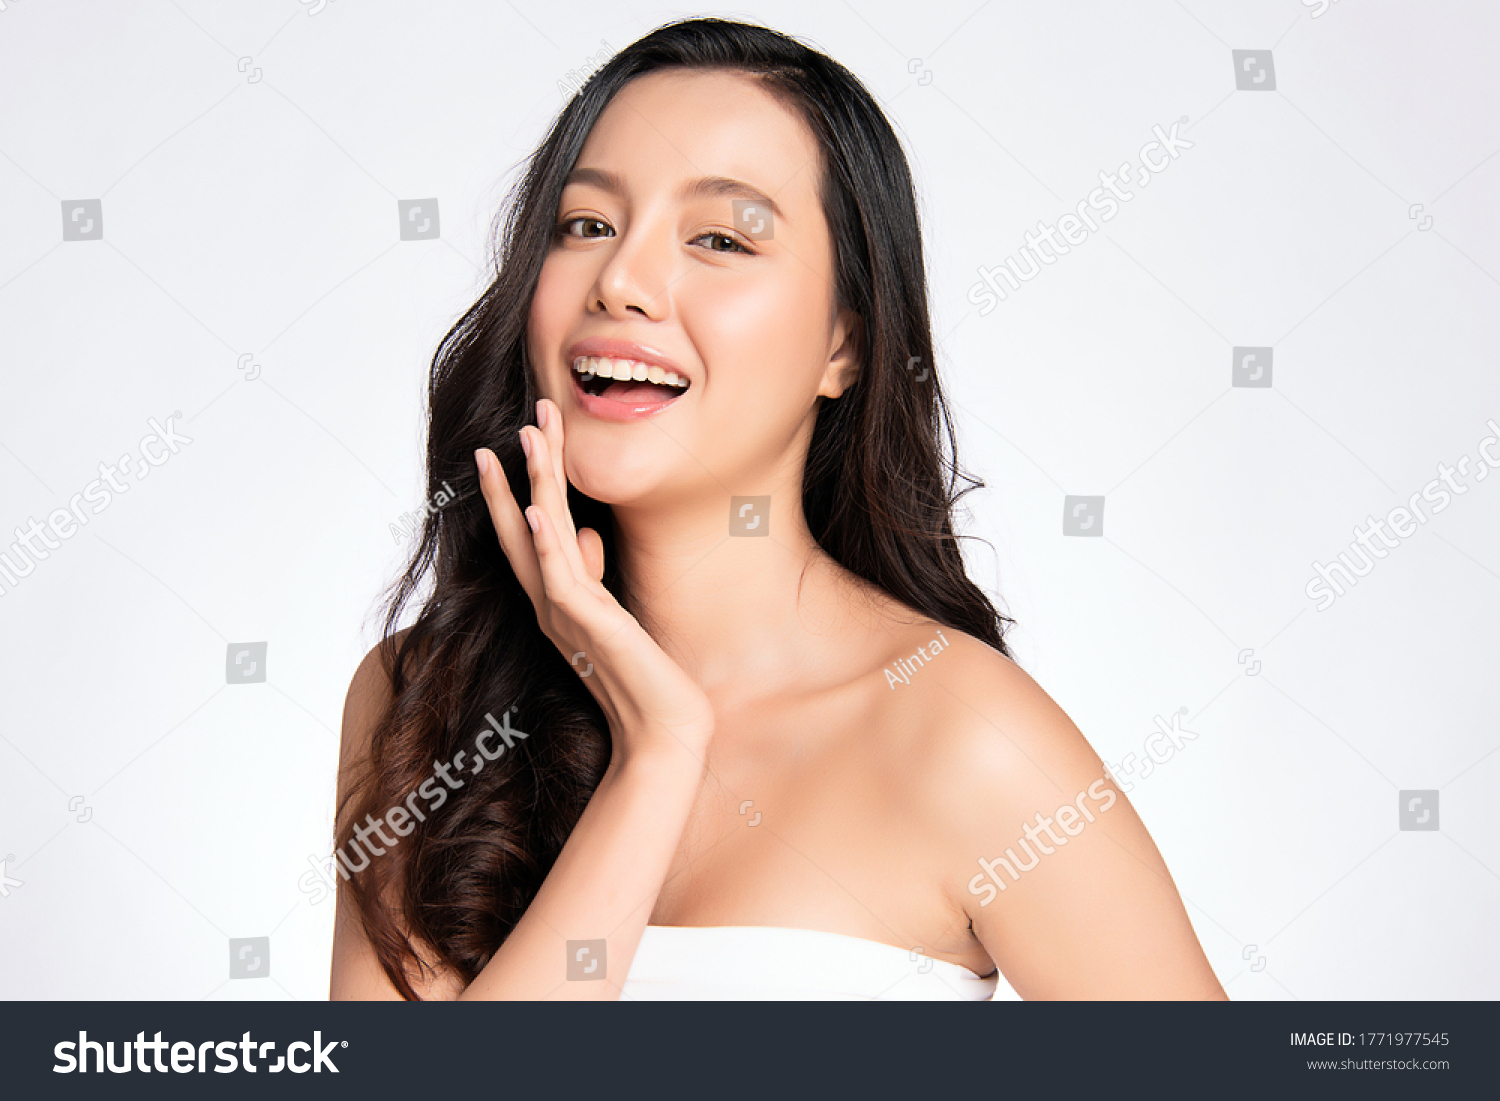 Beauty face. Smiling asian woman touching healthy skin portrait. Beautiful happy girl model with fresh glowing hydrated facial skin and natural makeup on white background, #1771977545